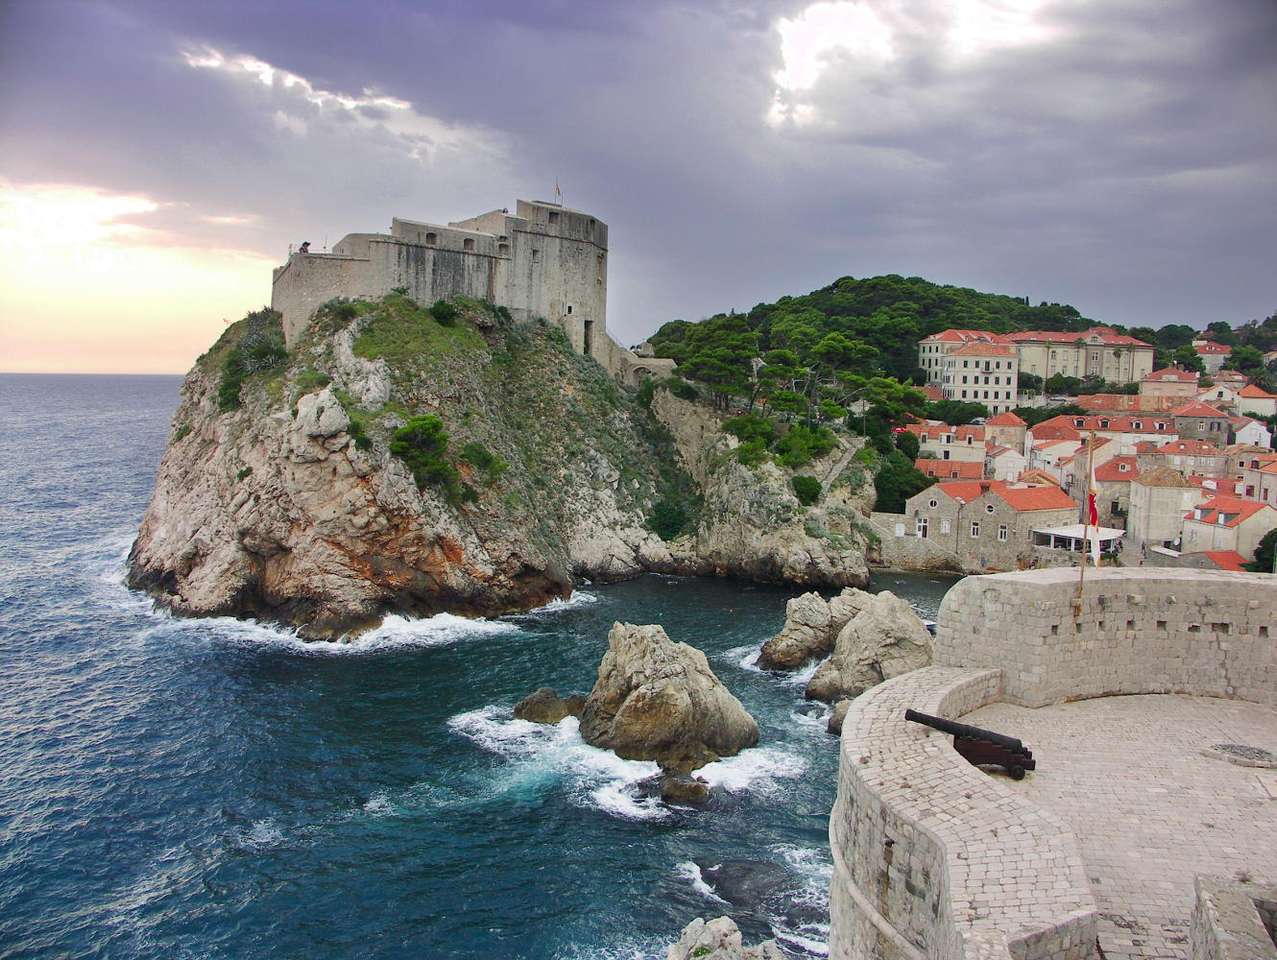 Fortifications in Dubrovnik (Croatia) puzzle online from photo